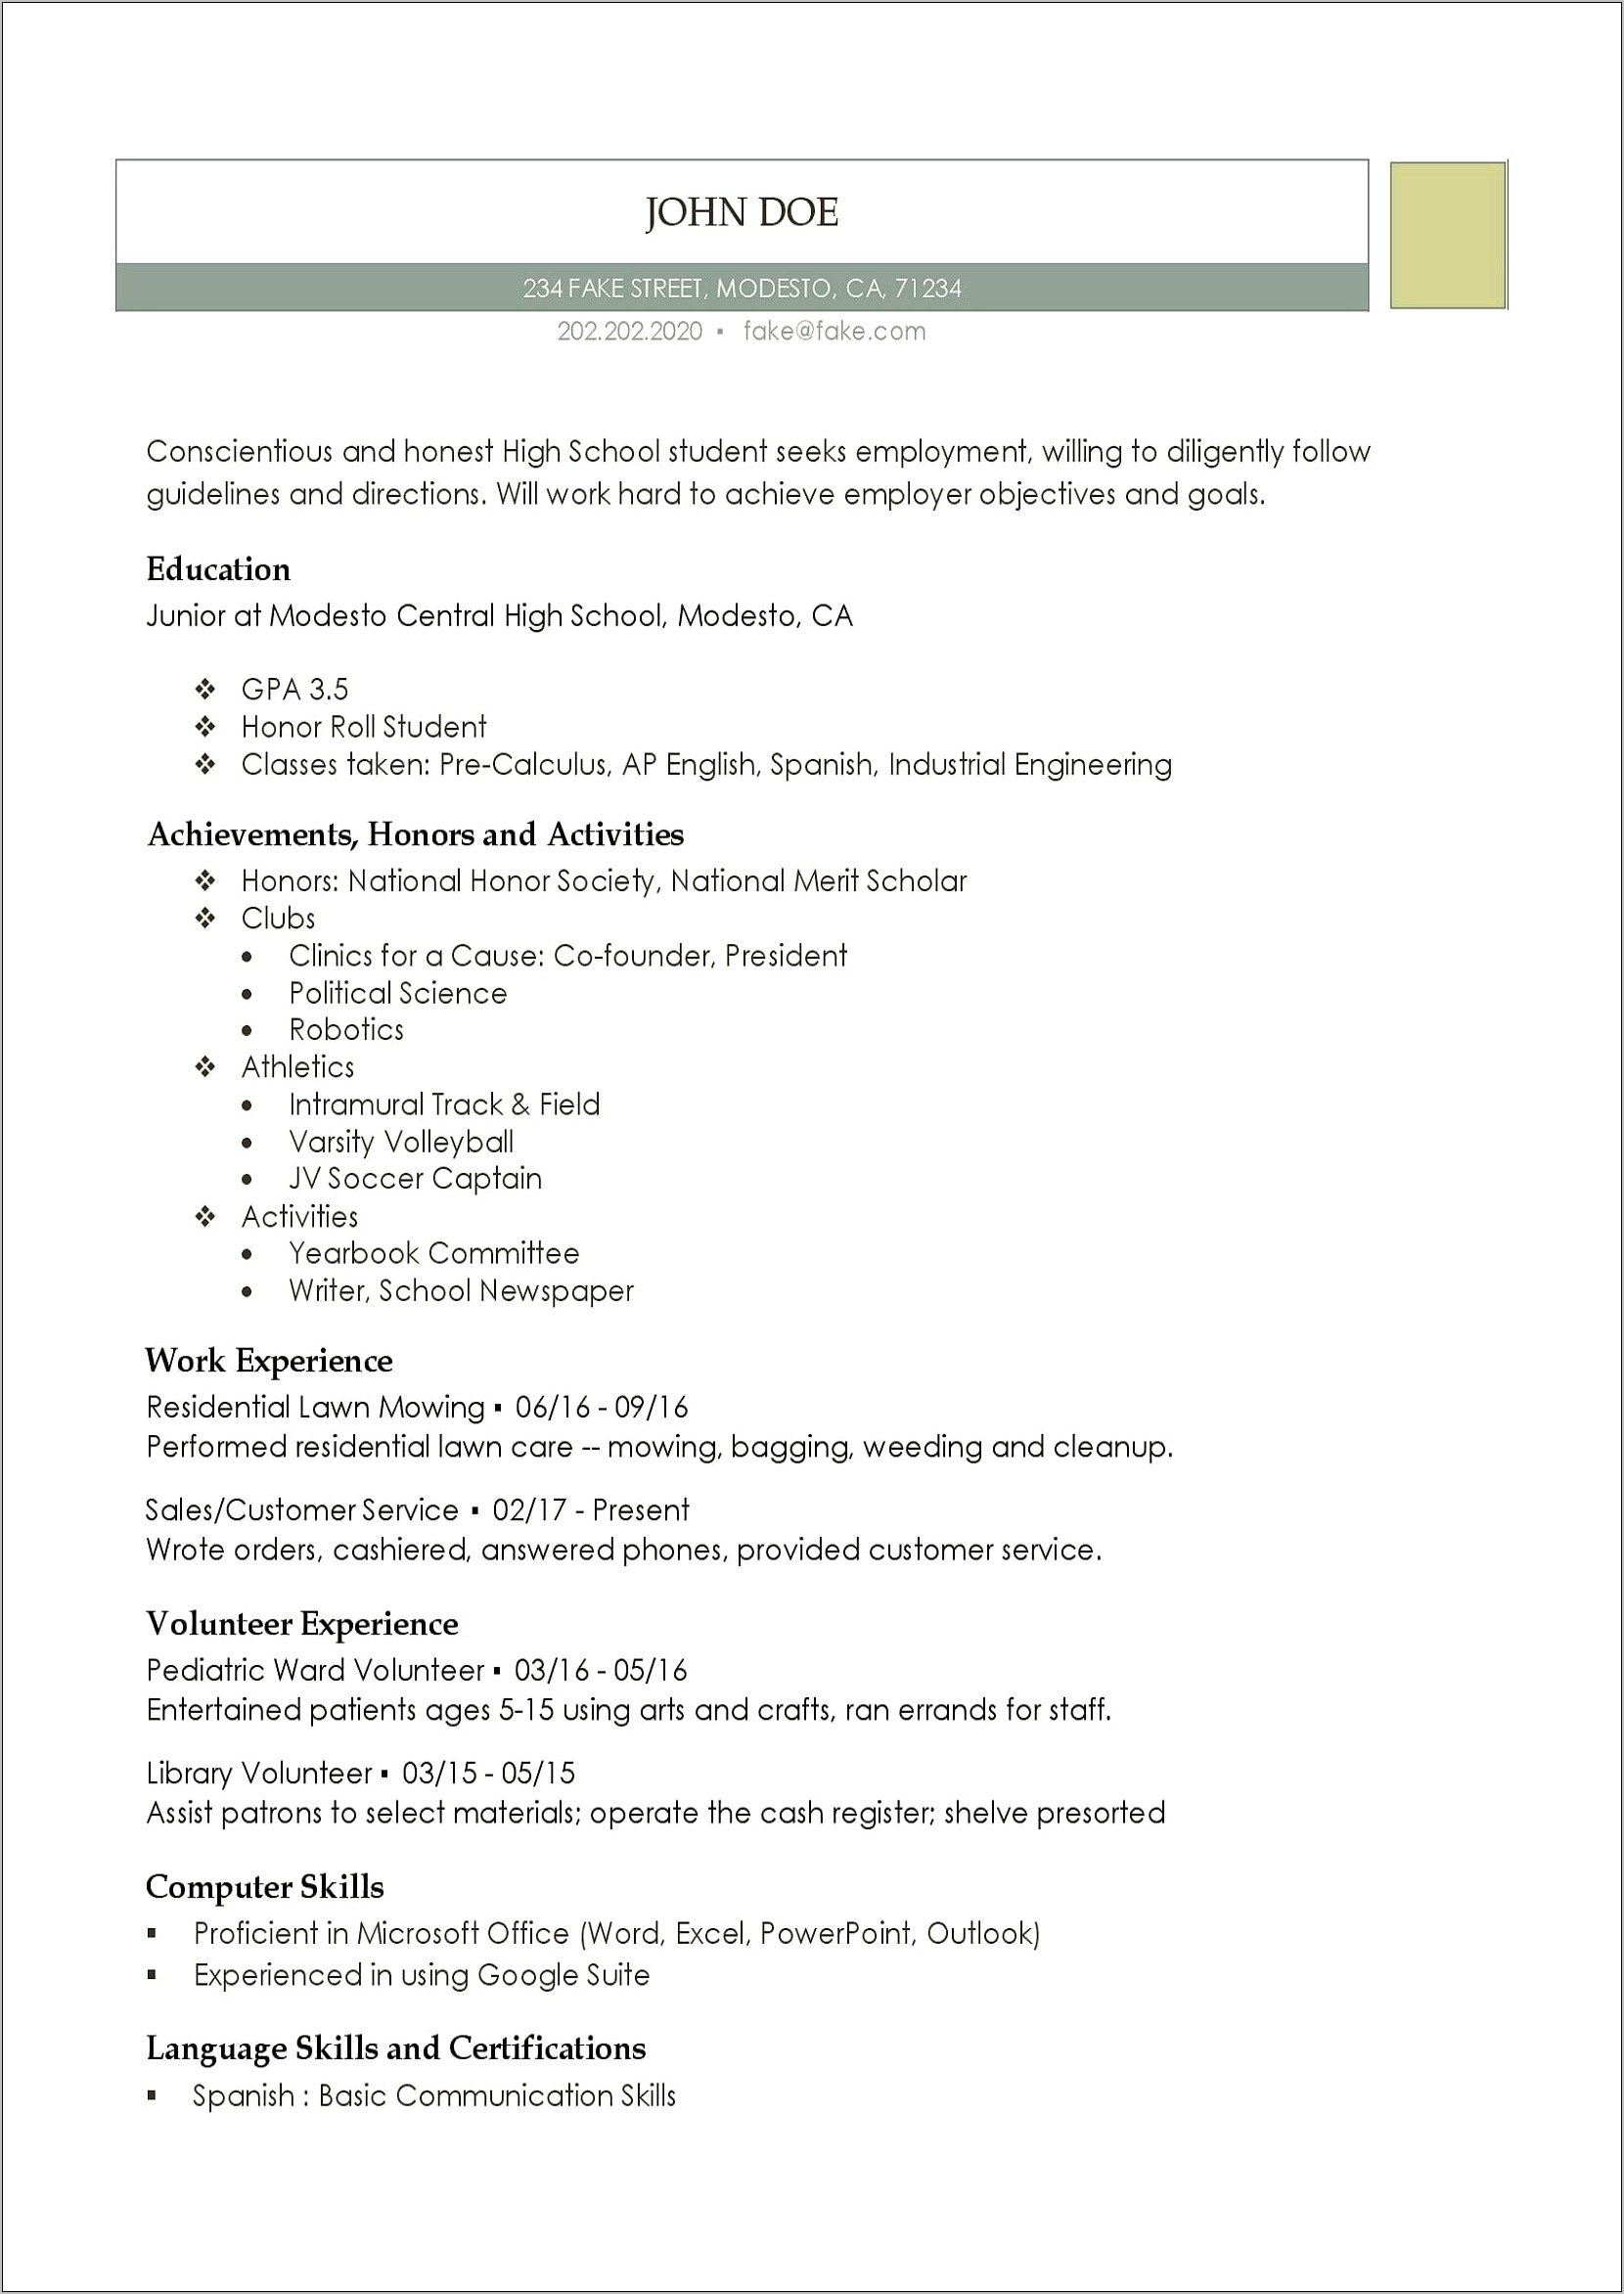 Is Highschool Classes An Experience For Resume